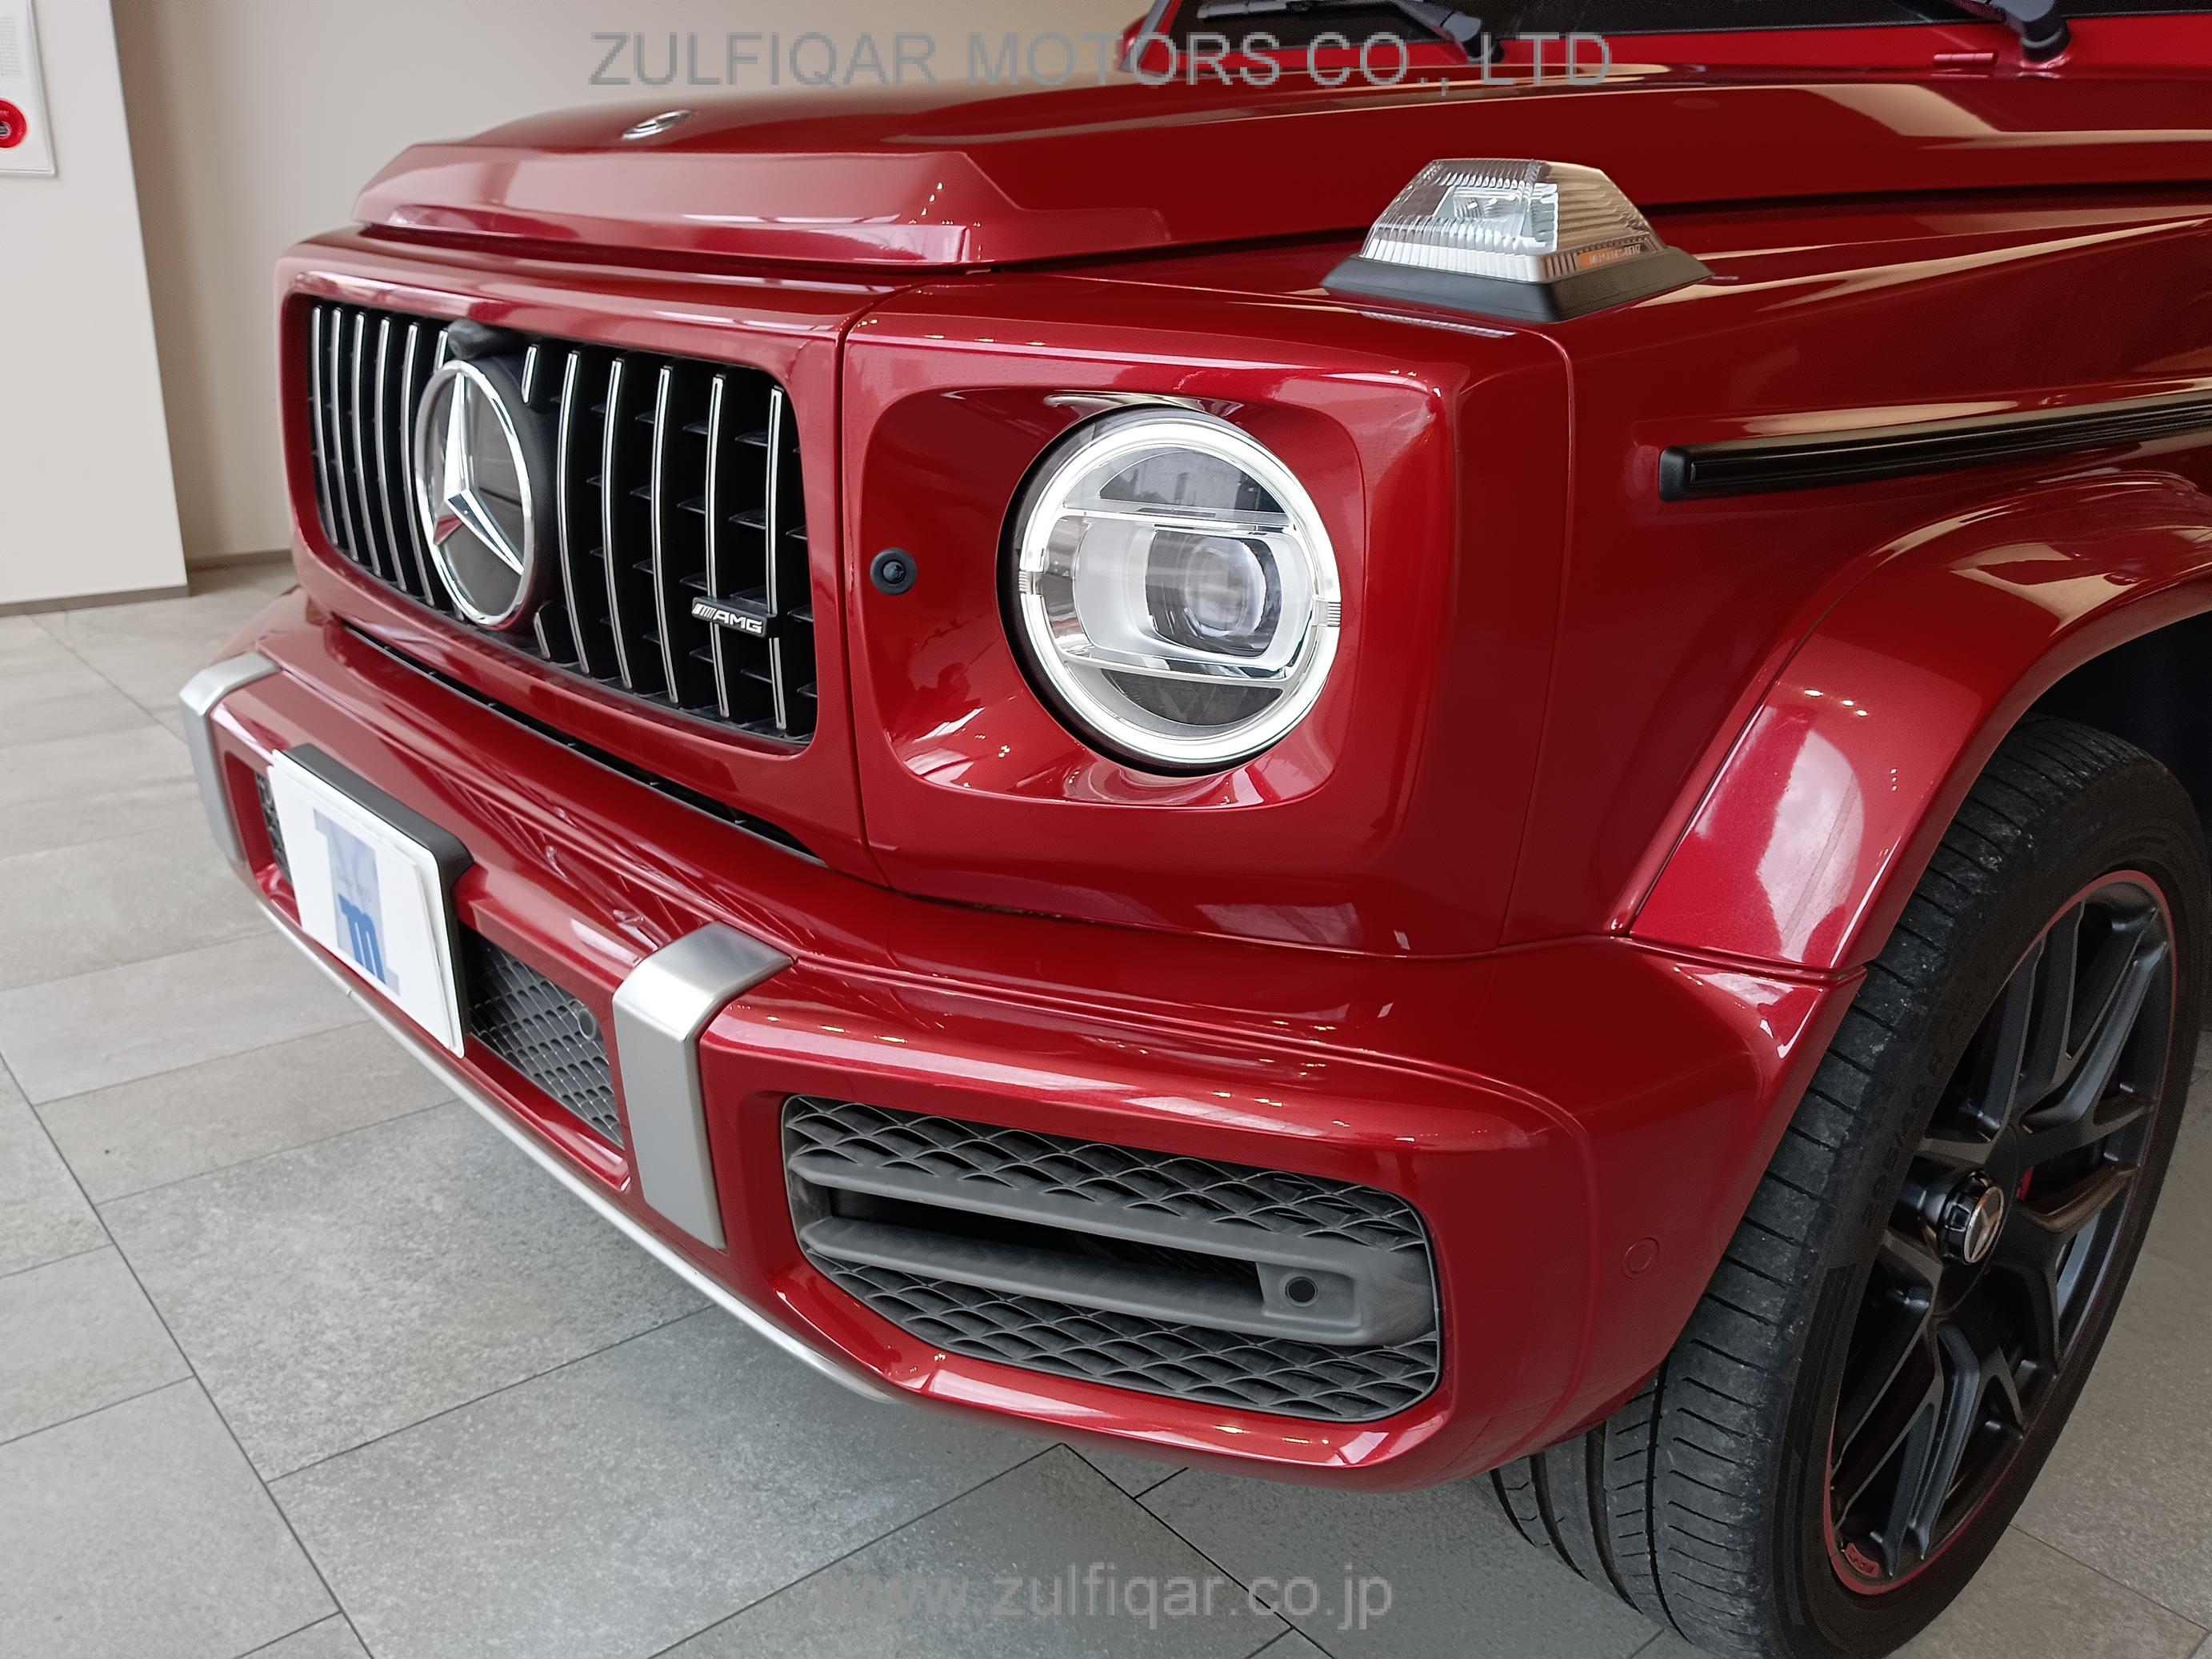 MERCEDES AMG G CLASS 2019 Image 44